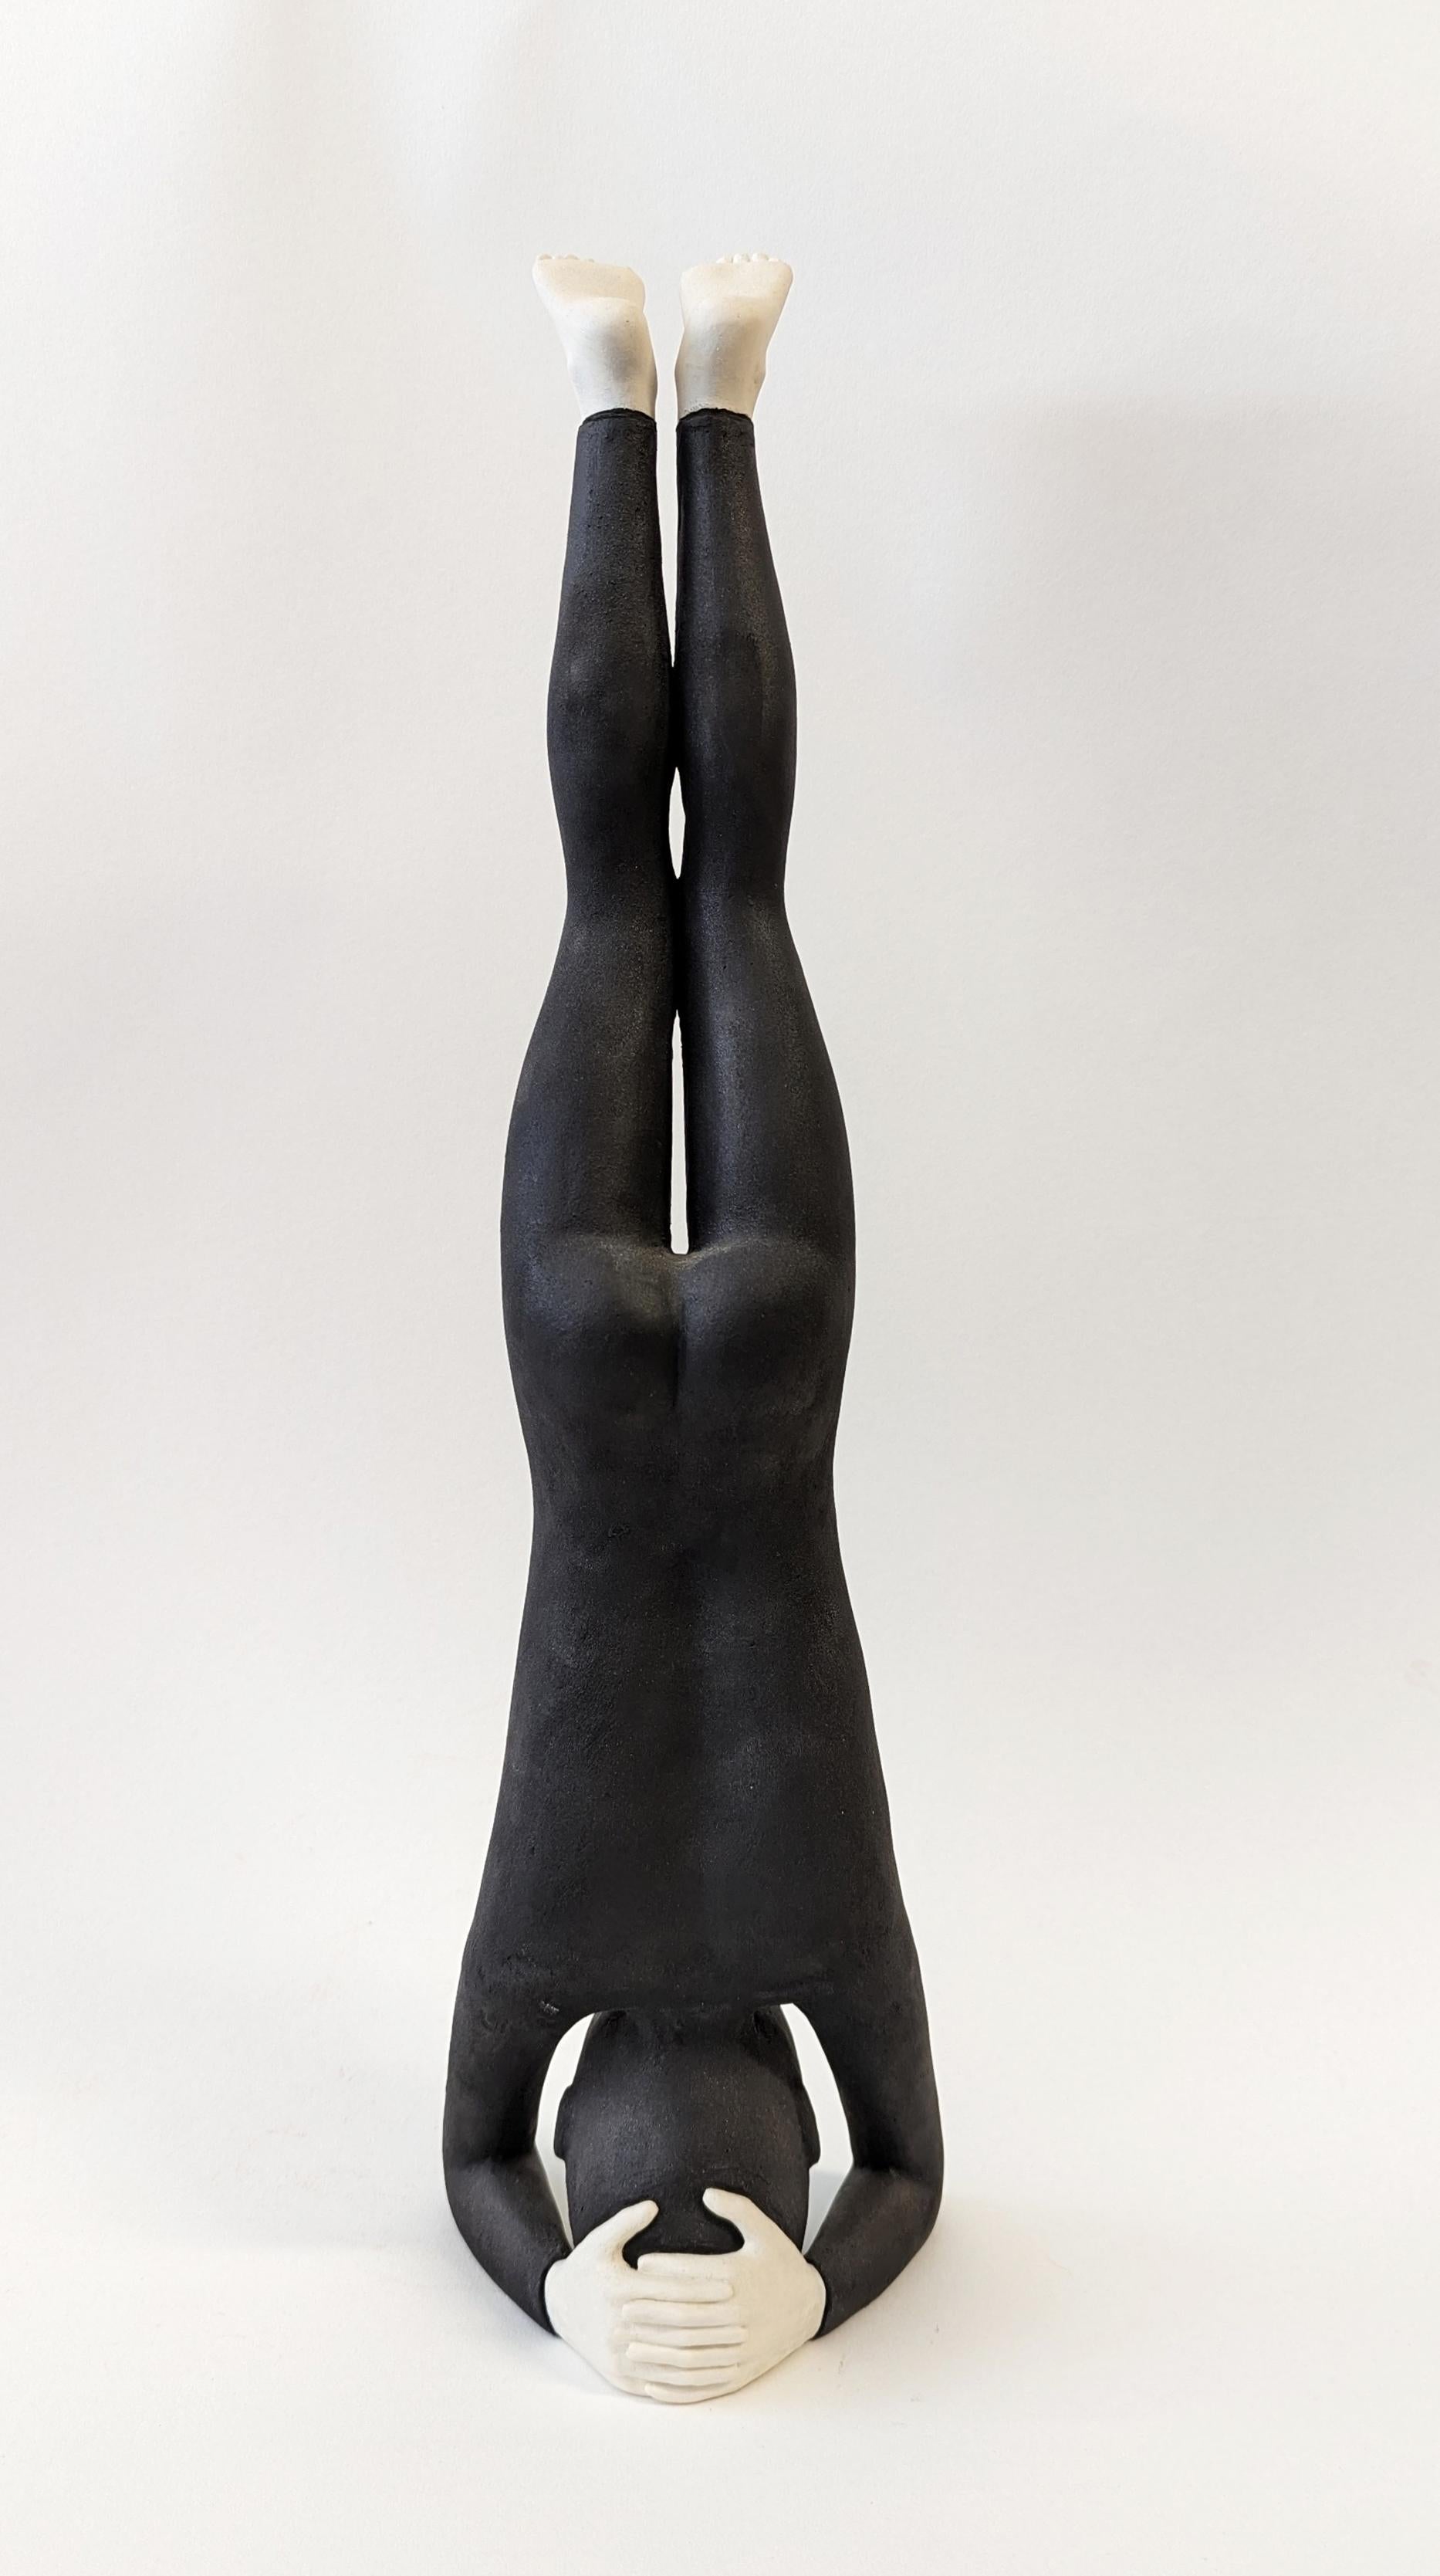 Headstand - figurative sculpture  - Sculpture by Orly Montag